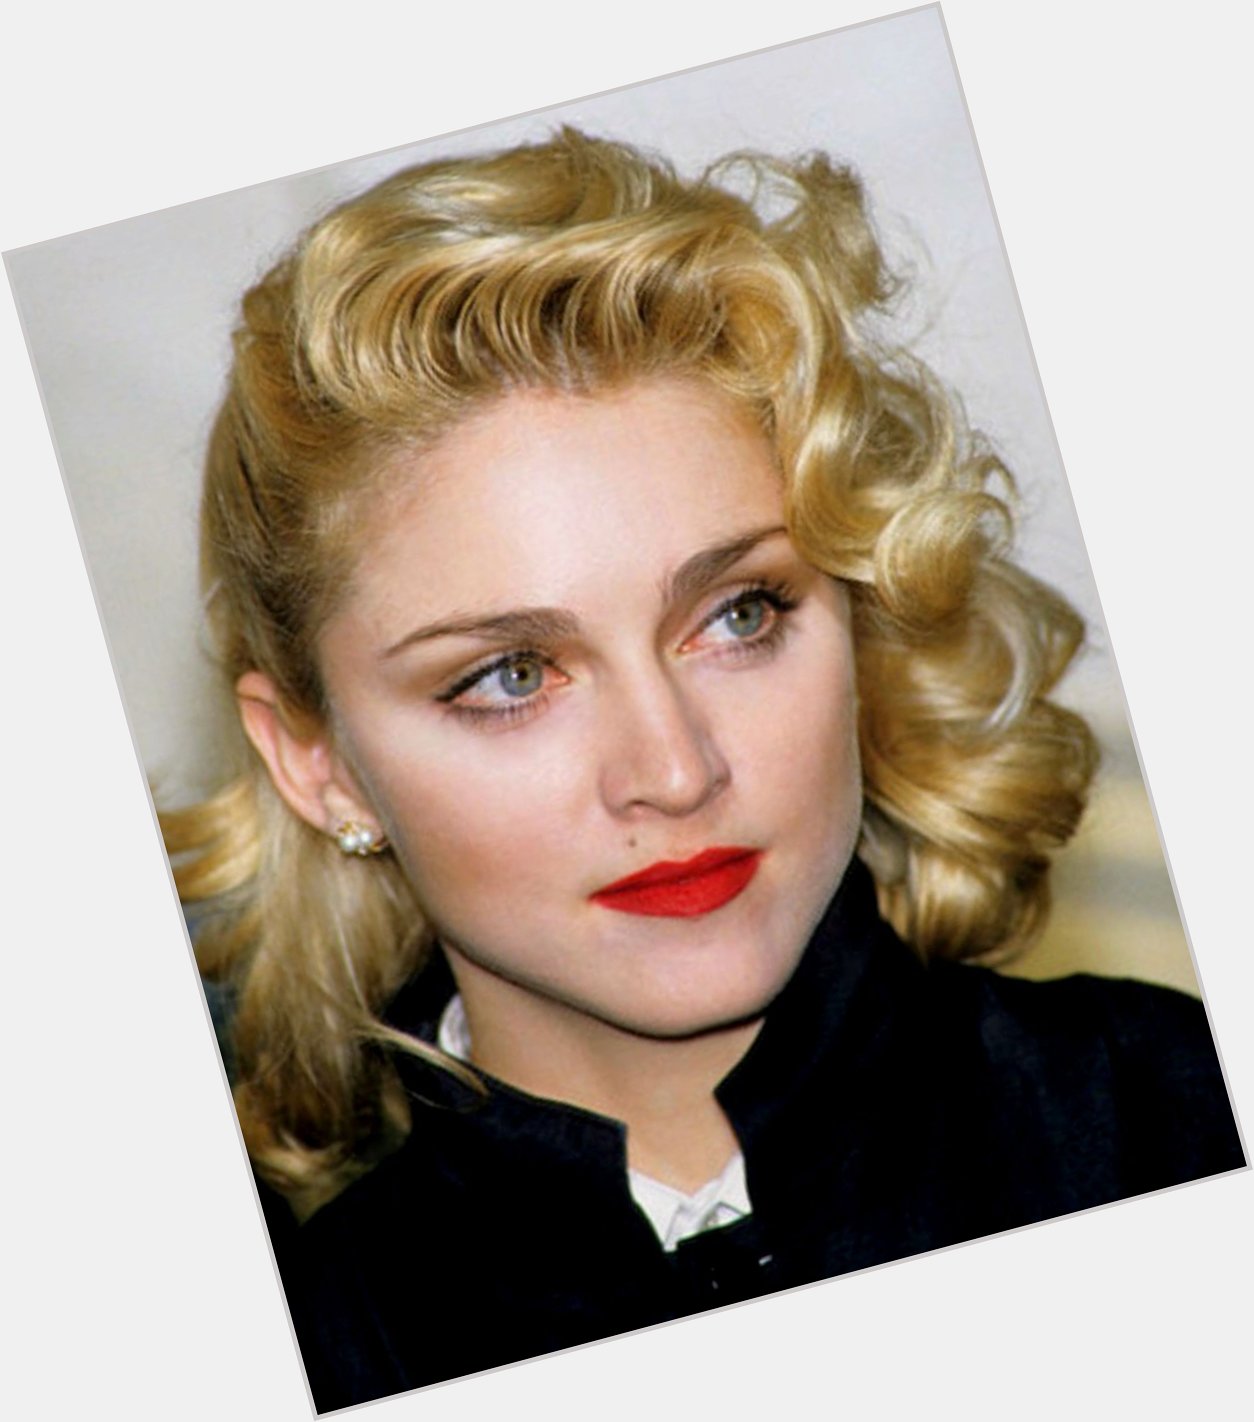 Madonna August 16 Sending Very Happy Birthday WIshes! All the Best!   